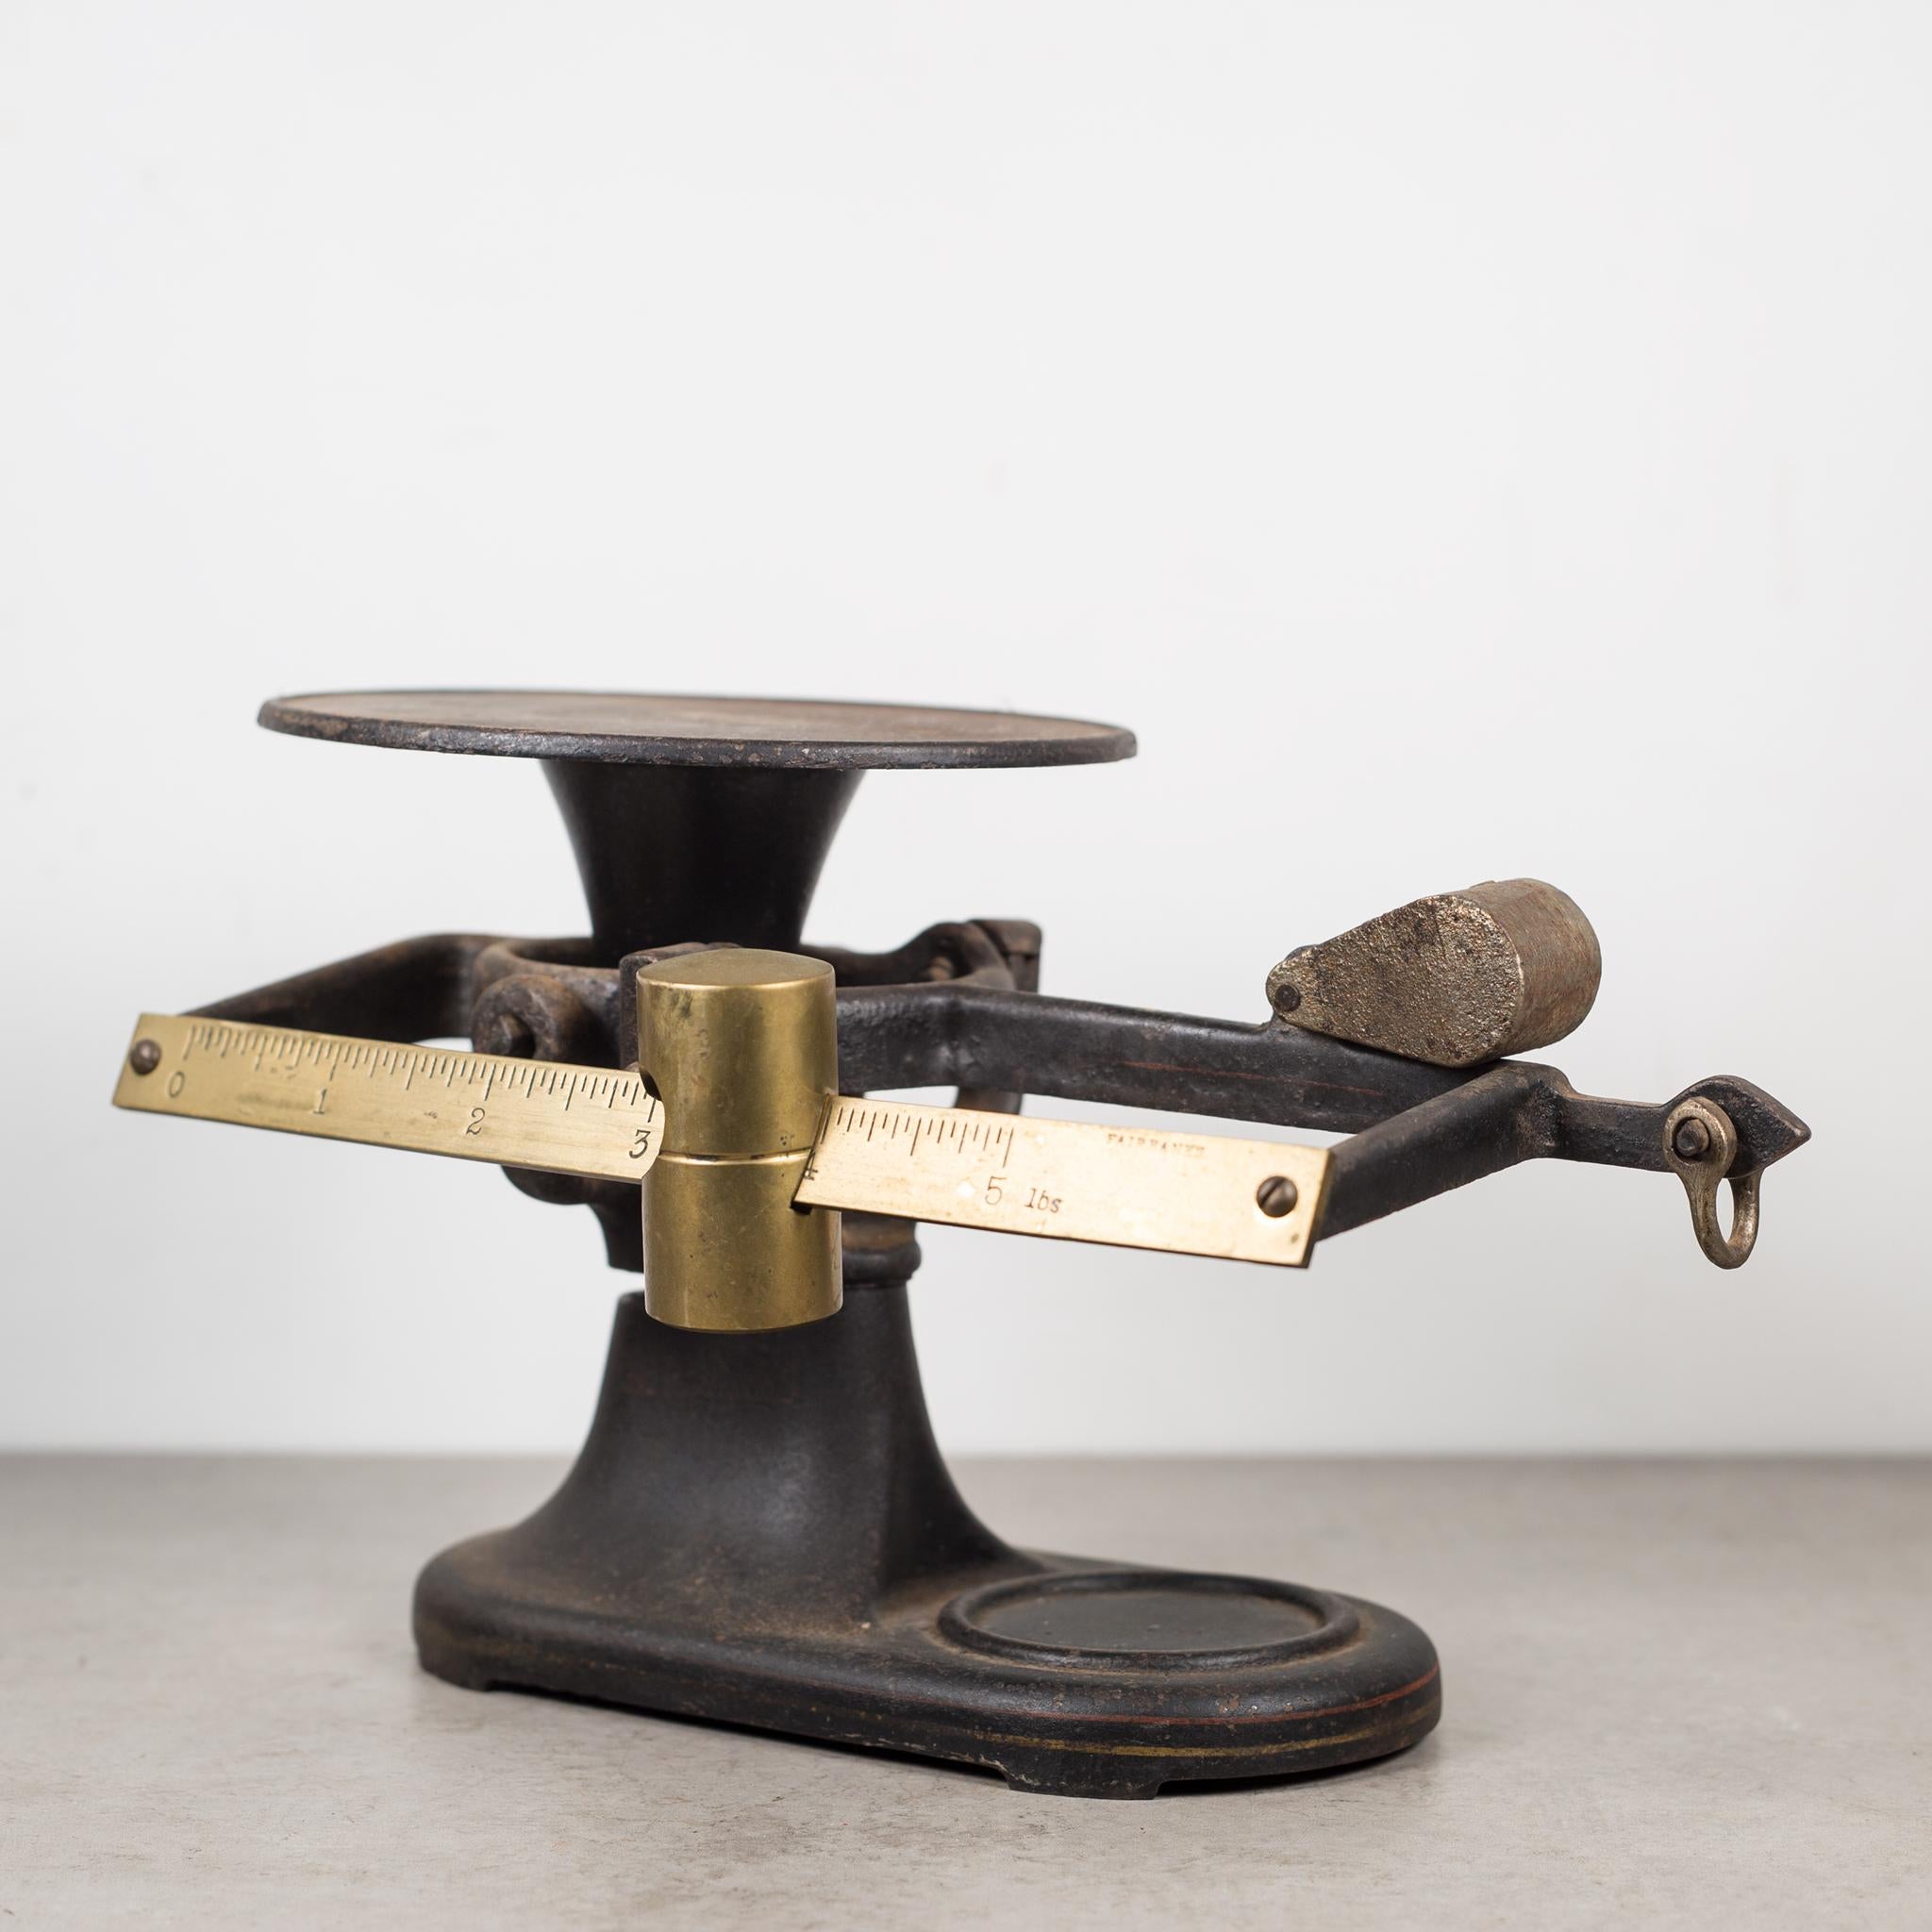 About

A cast iron balance scale with original label, brass accents and 